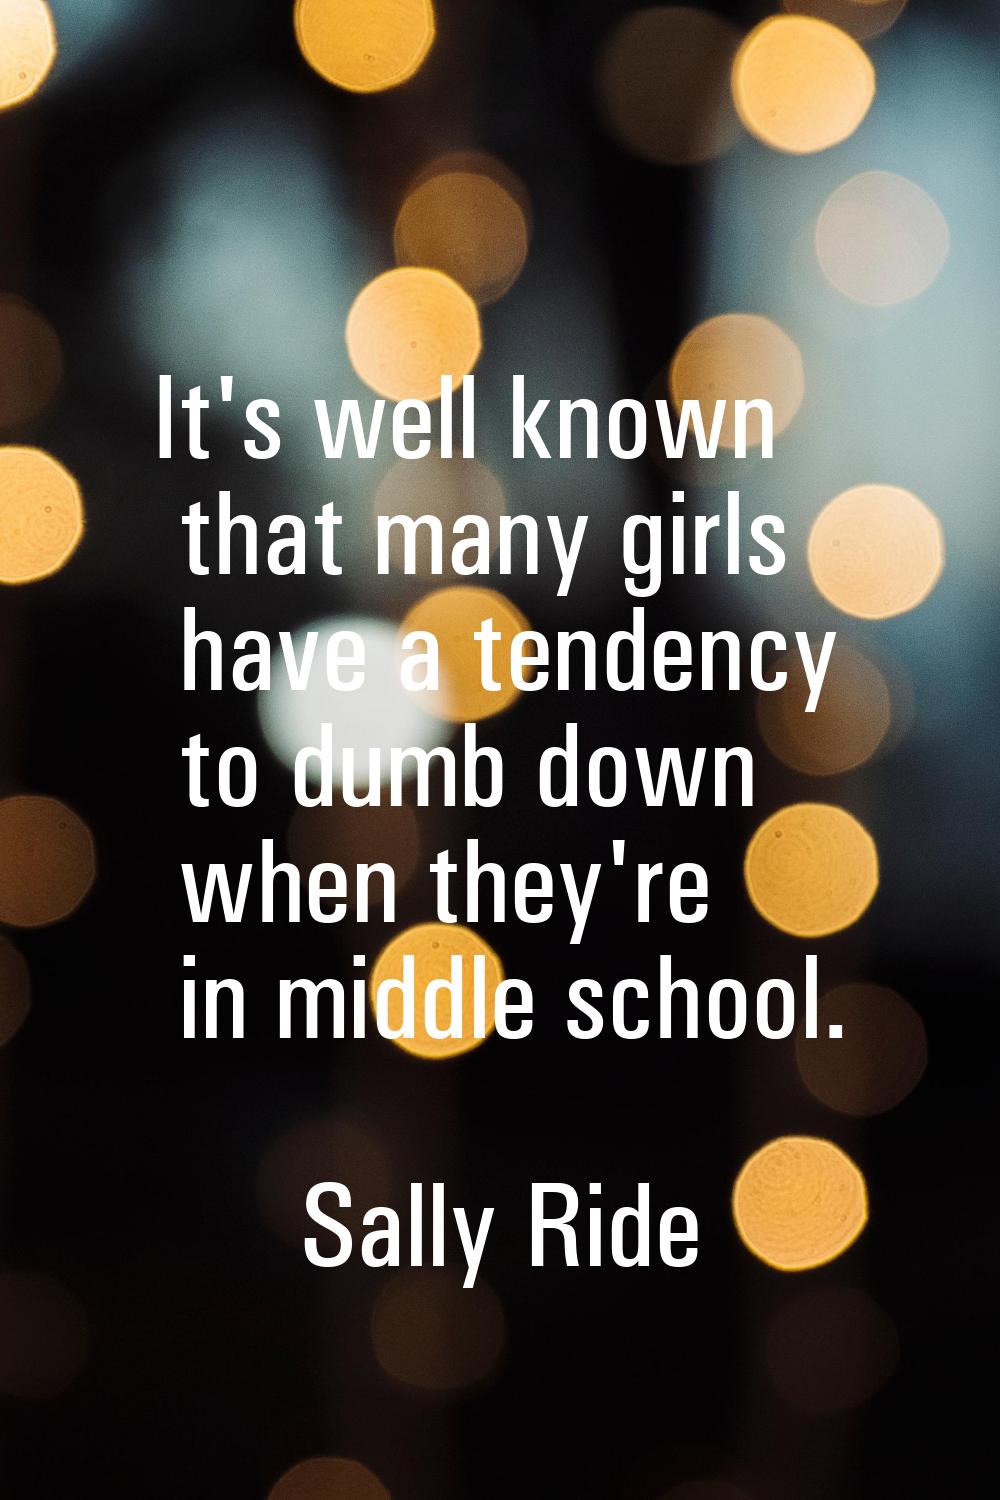 It's well known that many girls have a tendency to dumb down when they're in middle school.